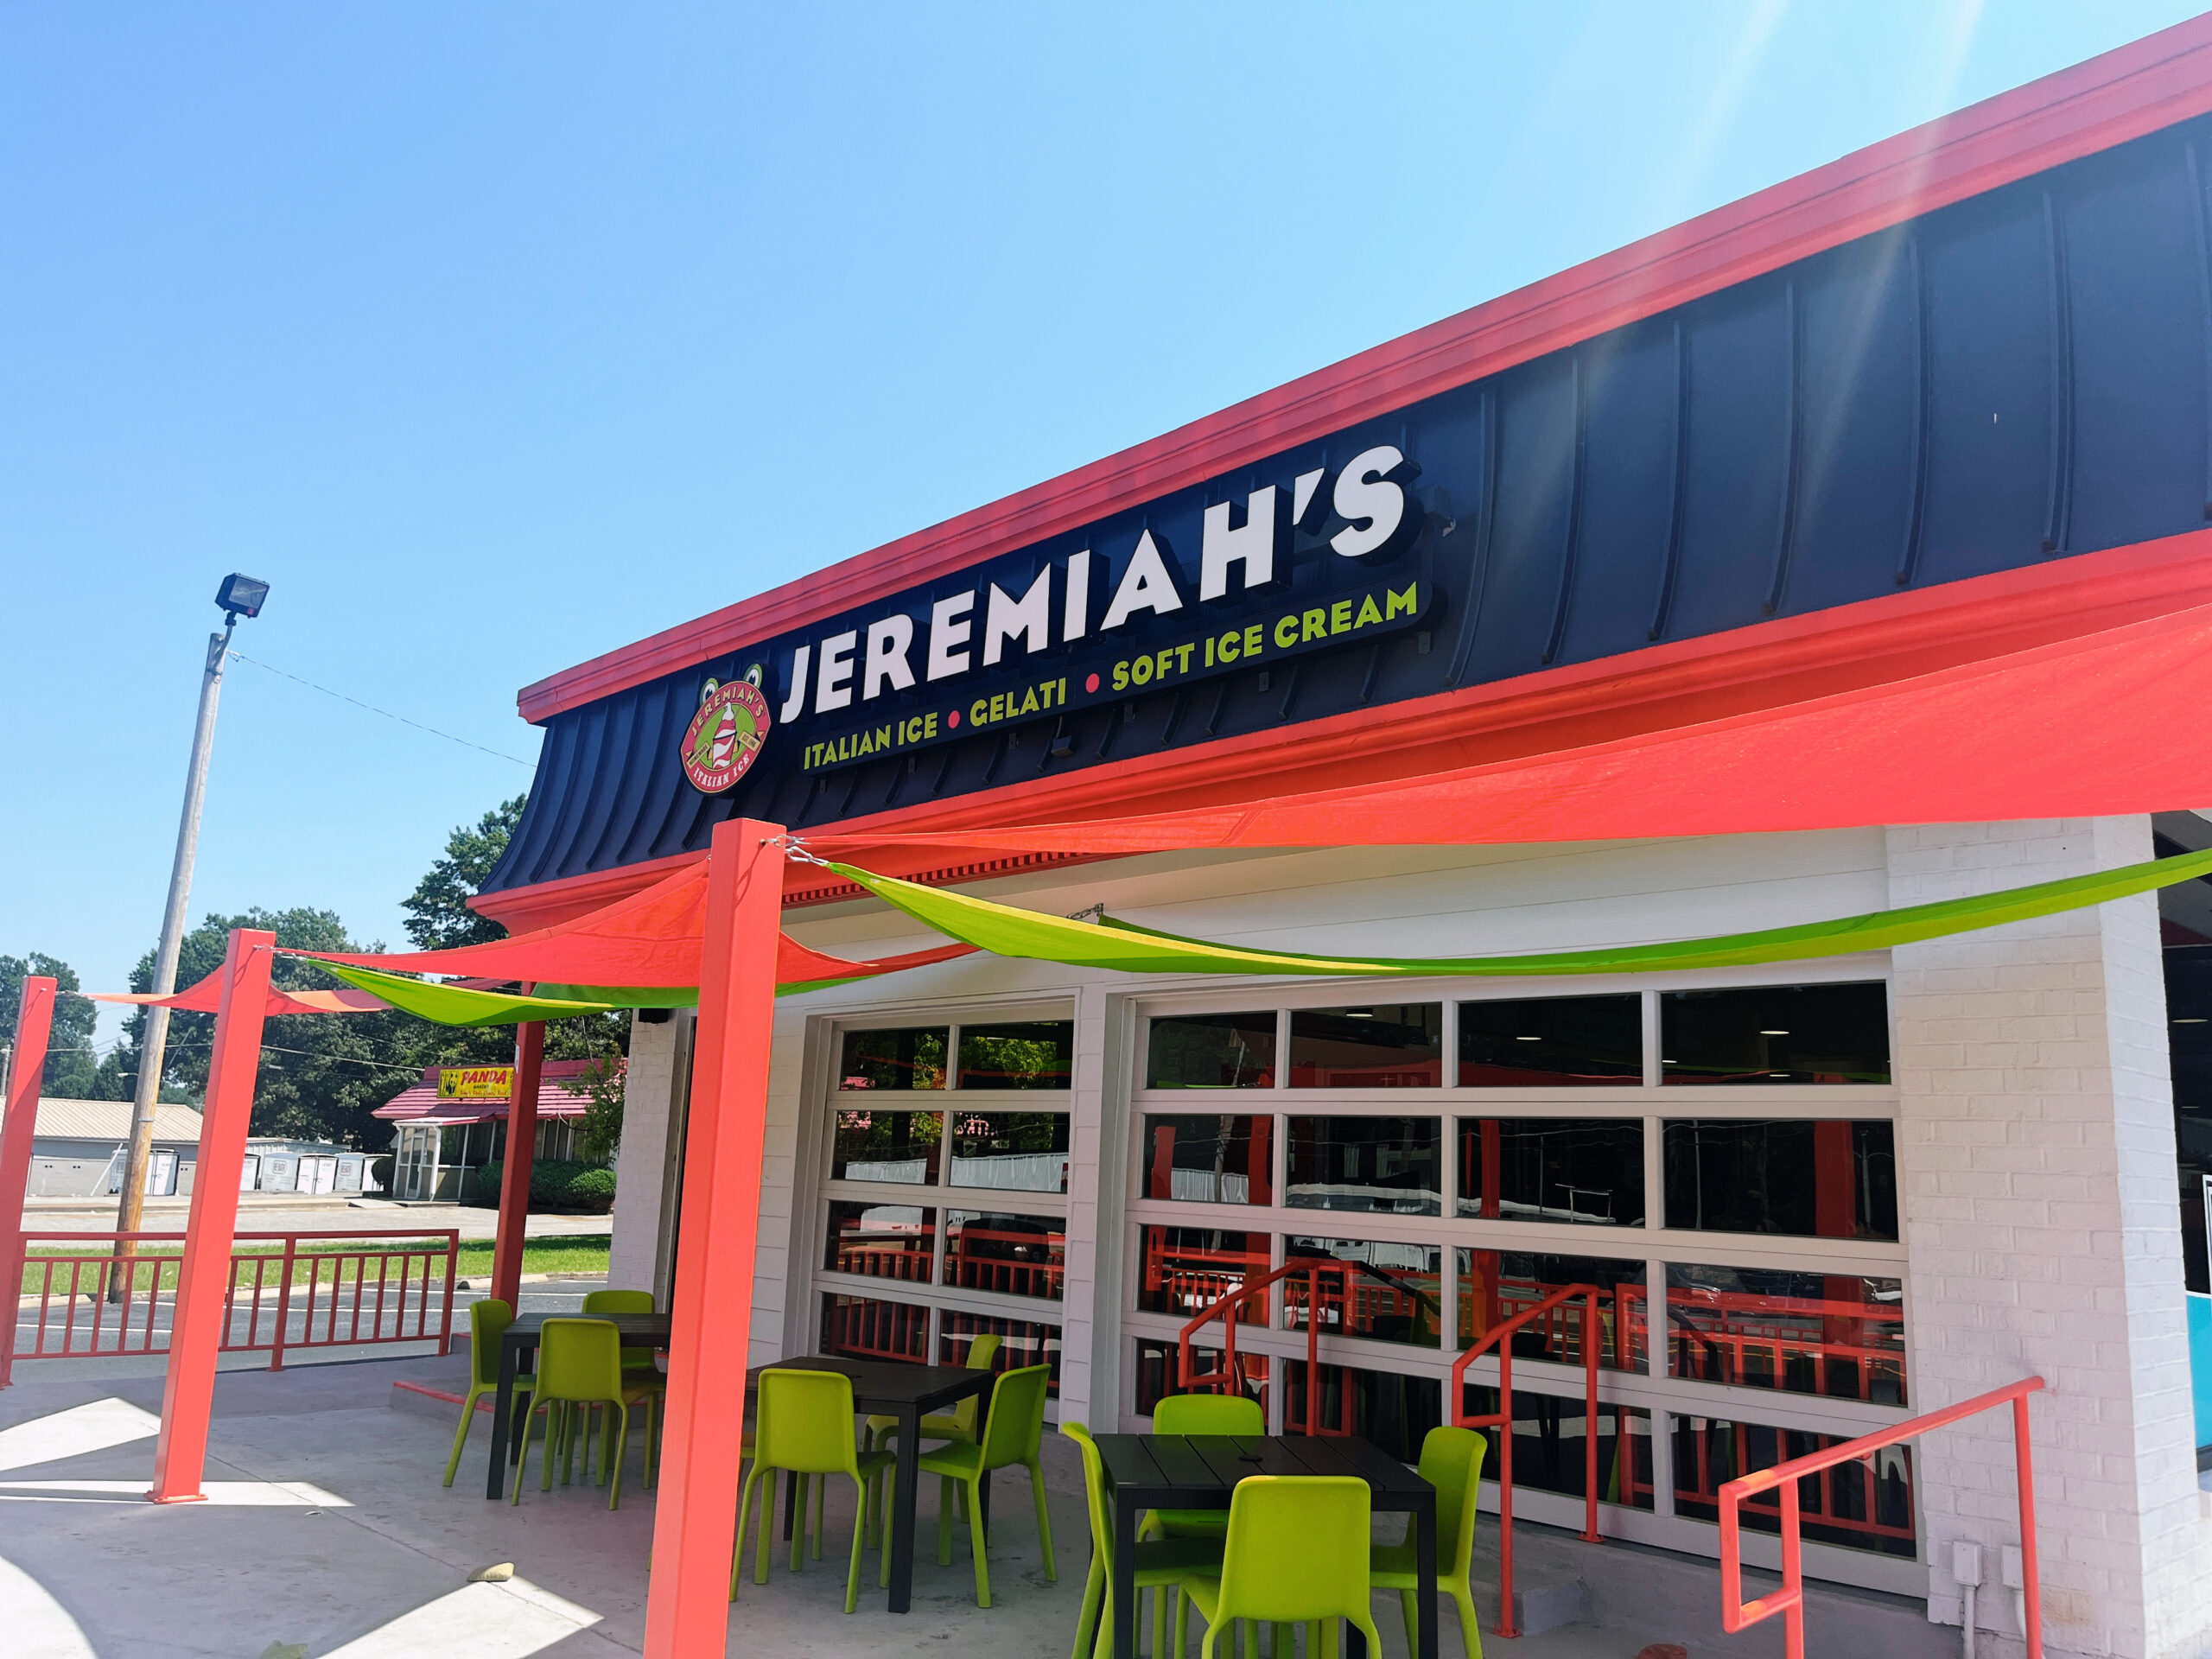 Refreshing Flavored Ice Desserts from Jeremiah’s